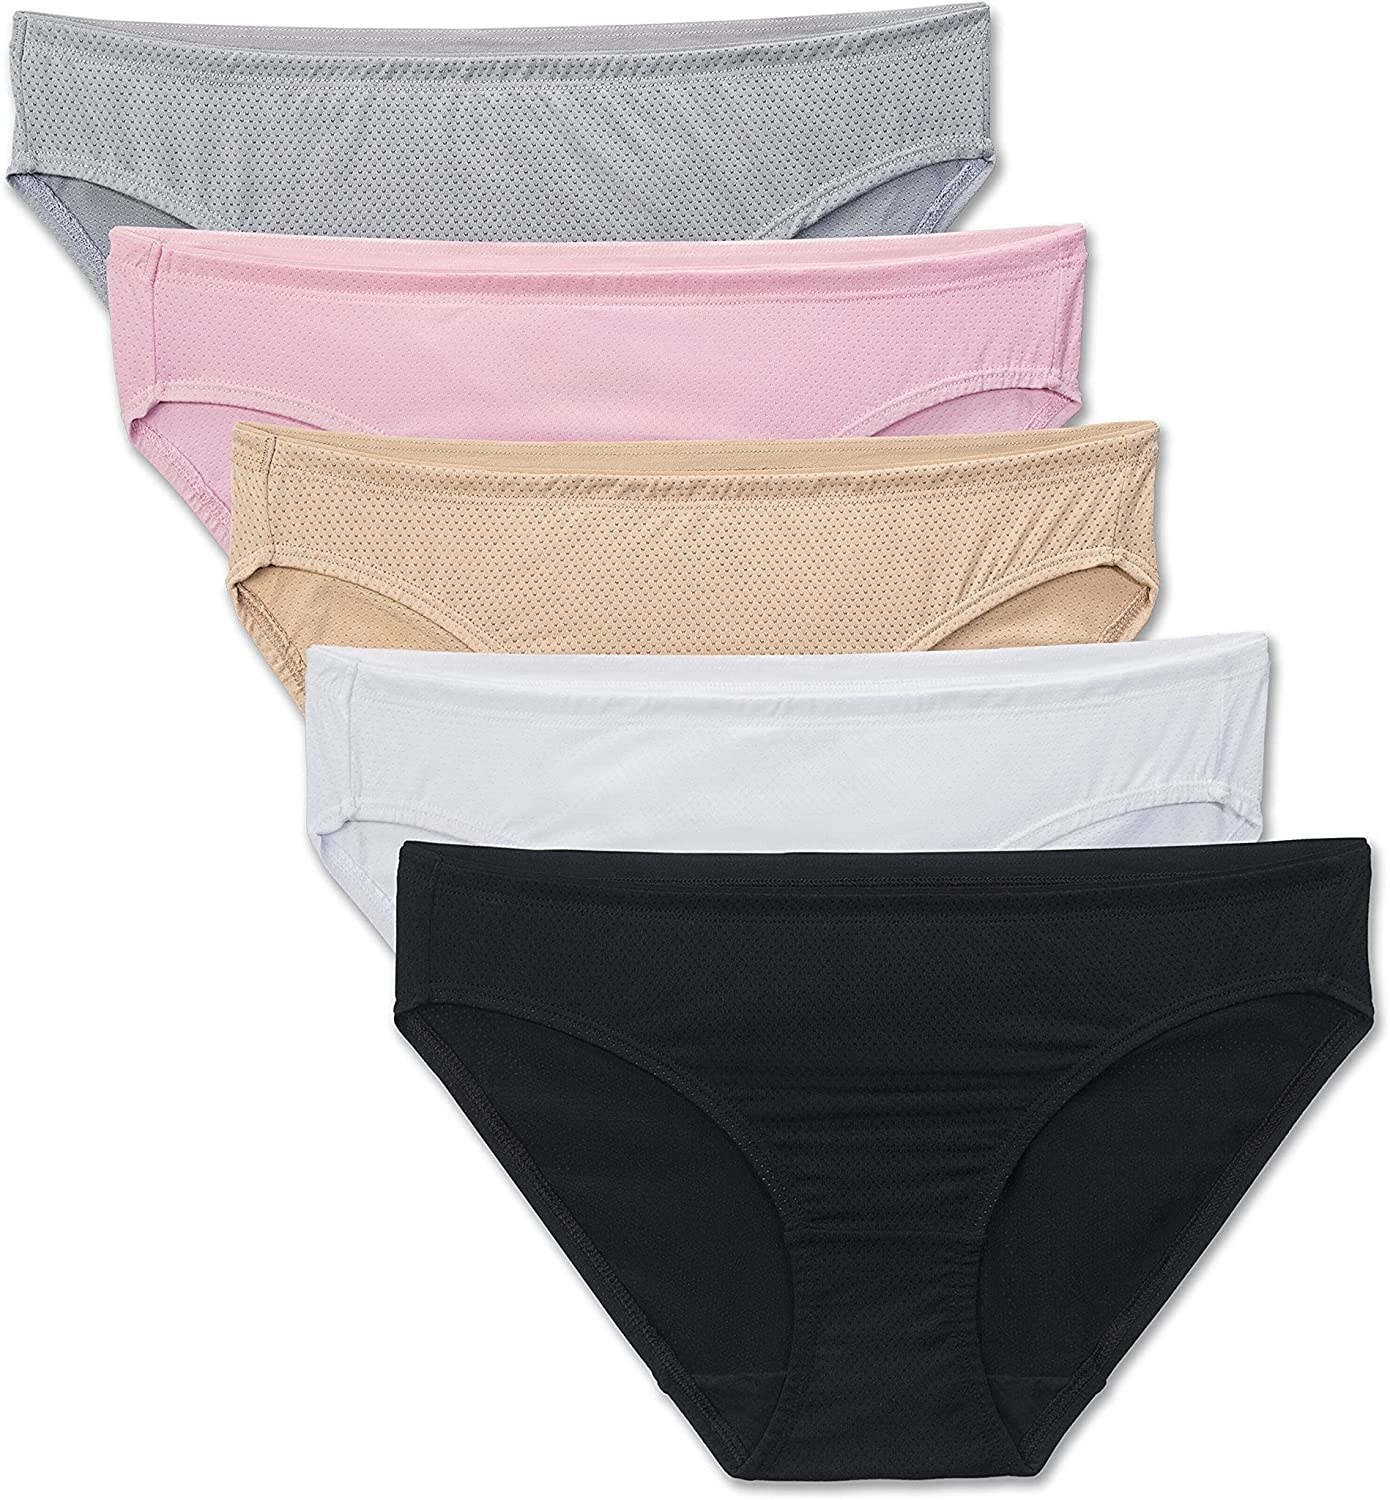 five pairs of underwear in different colors